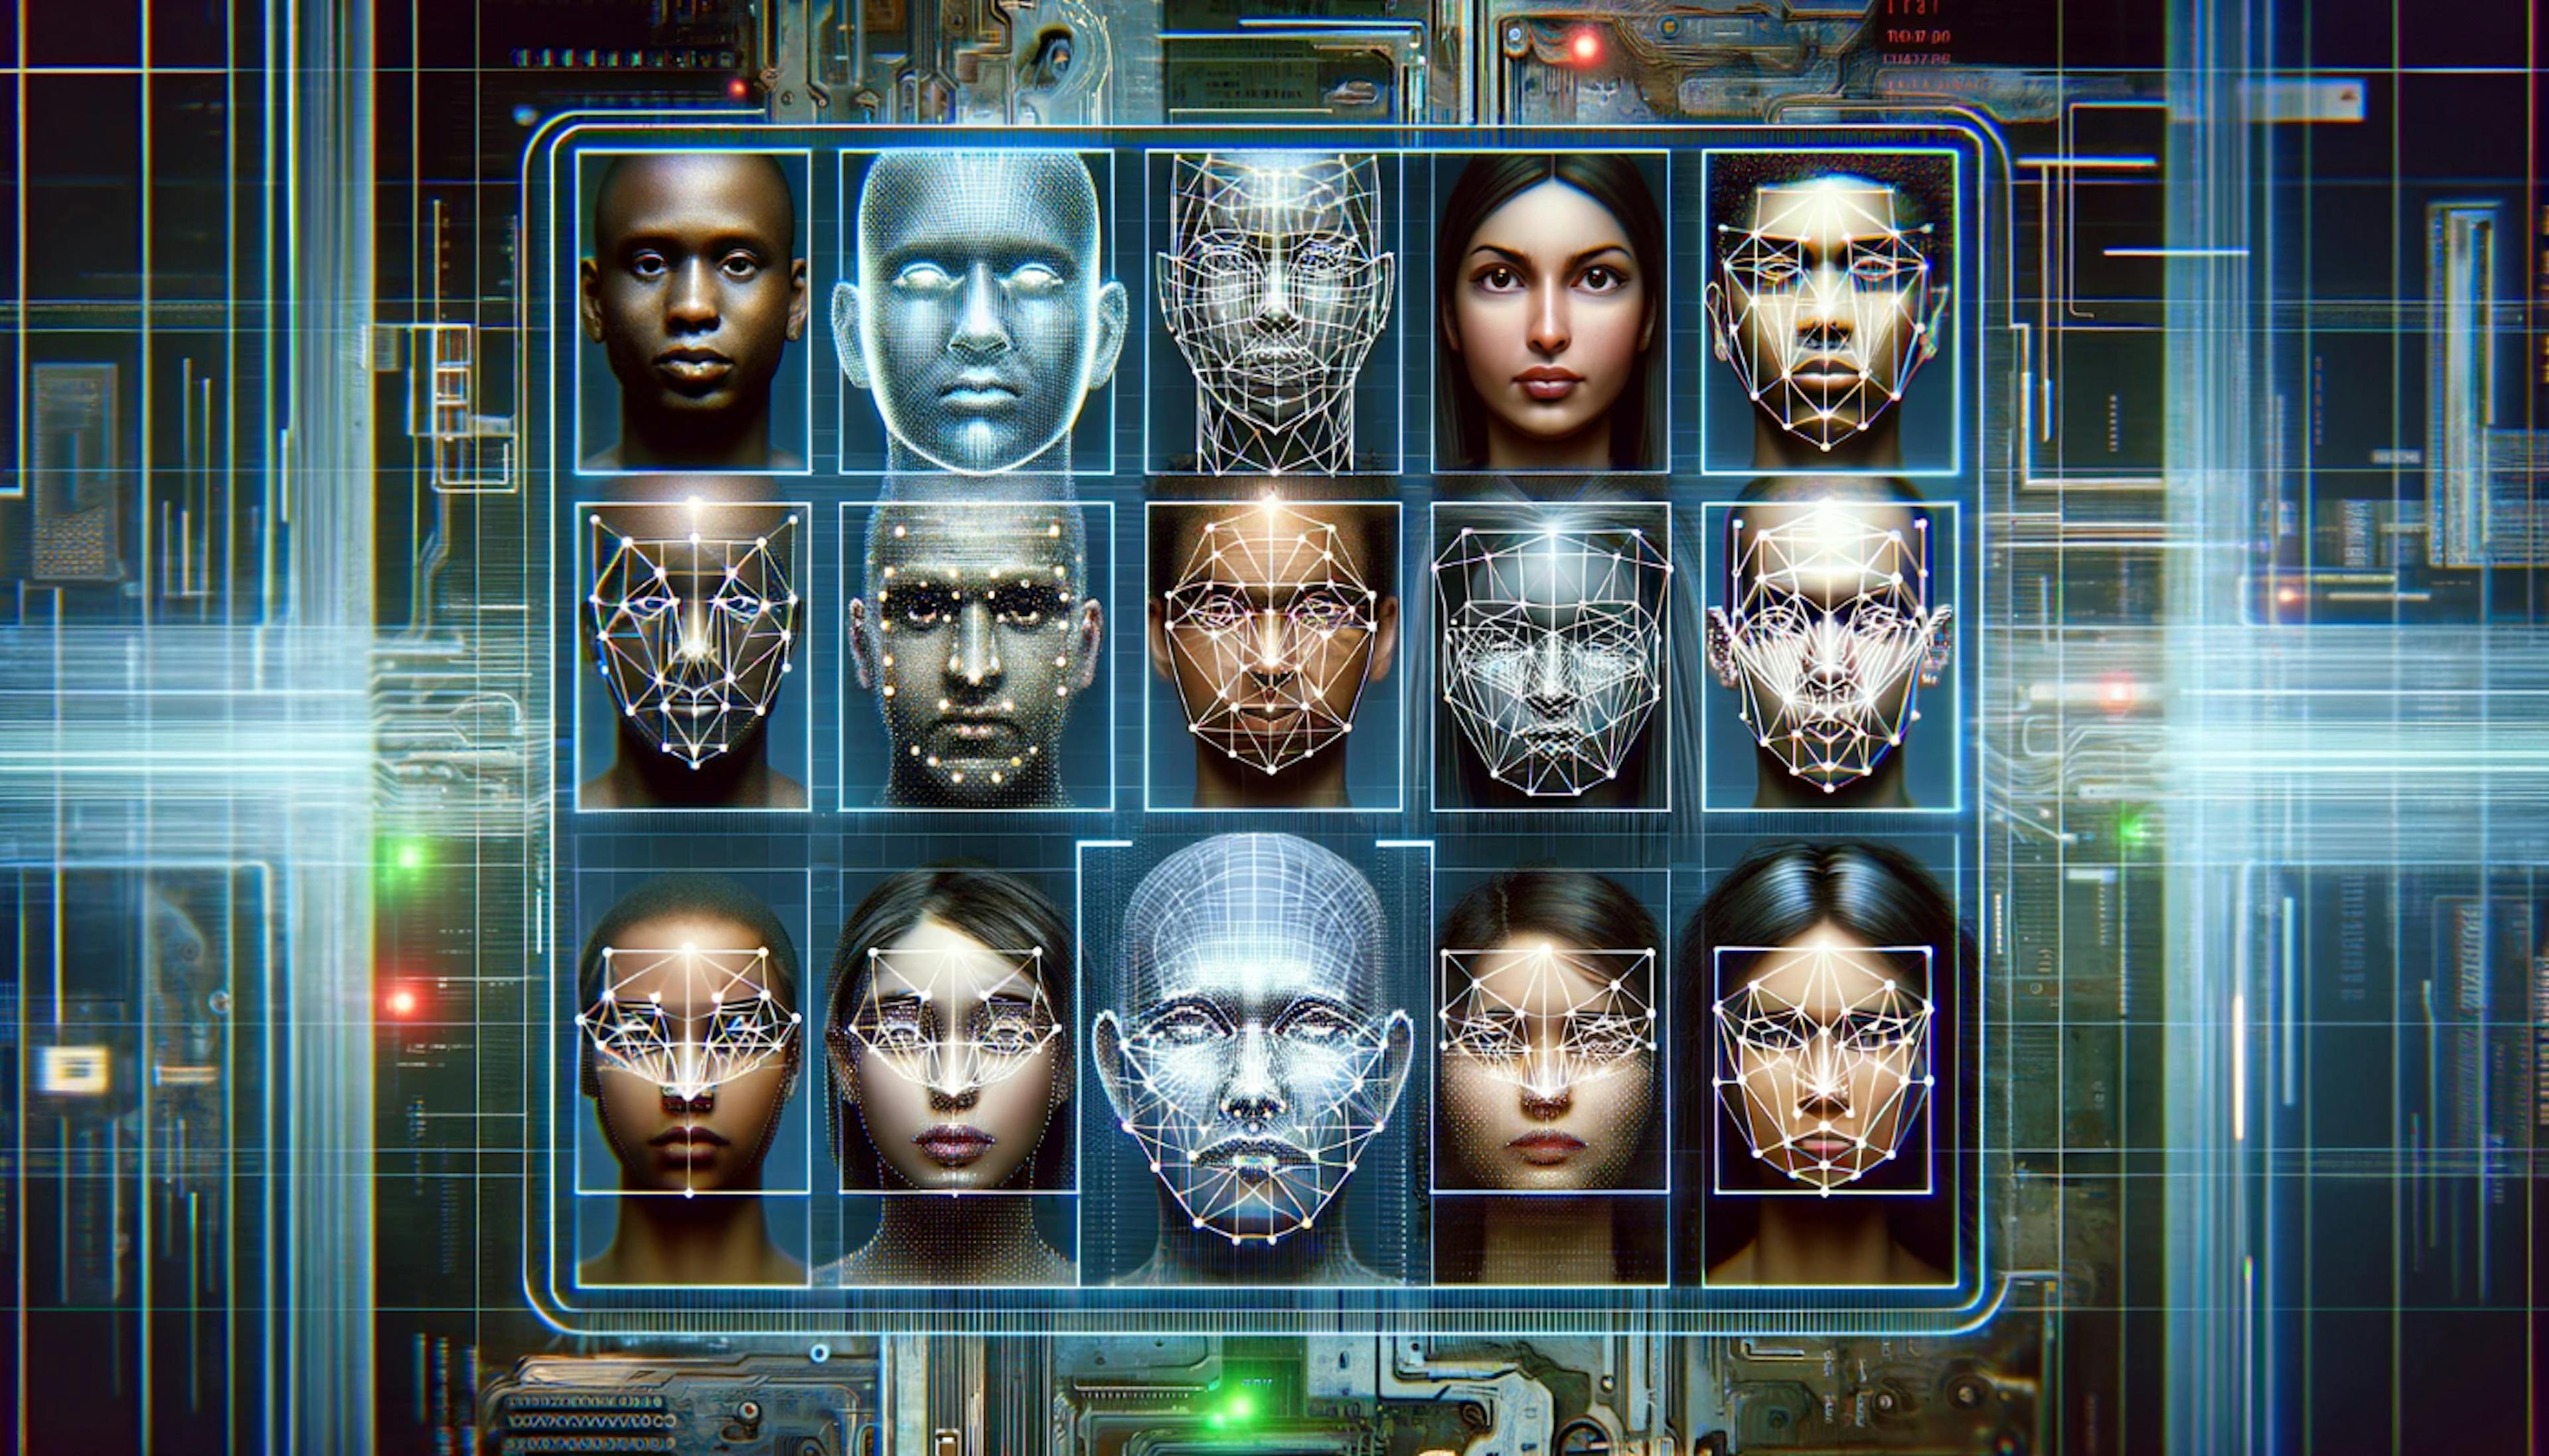 /bias-in-facial-recognition-tech-explore-how-facial-recognition-systems-can-perpetuate-biases feature image